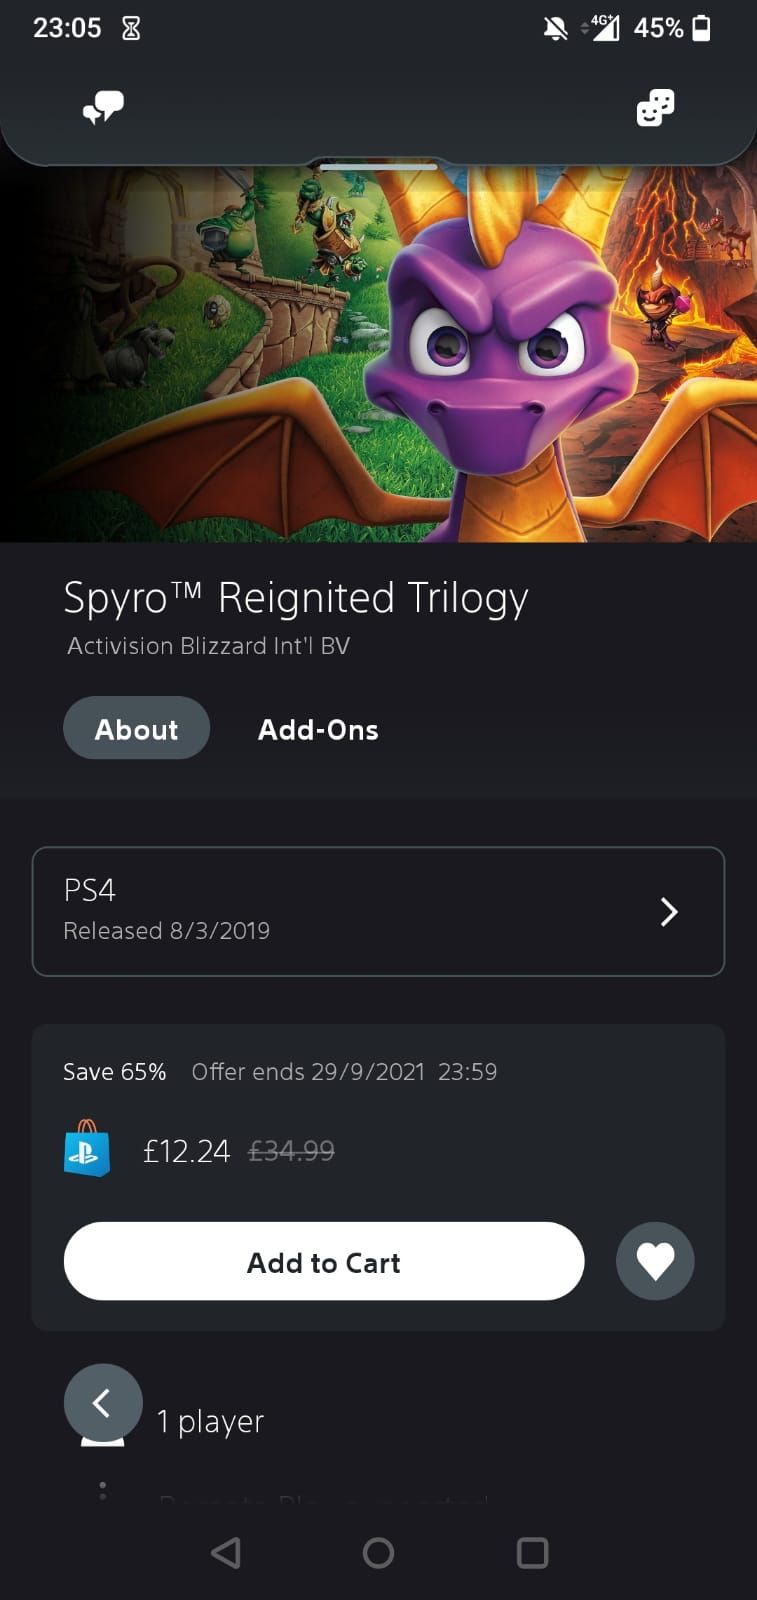 Spyro Reignited Trilogy wishlisted on the PS app